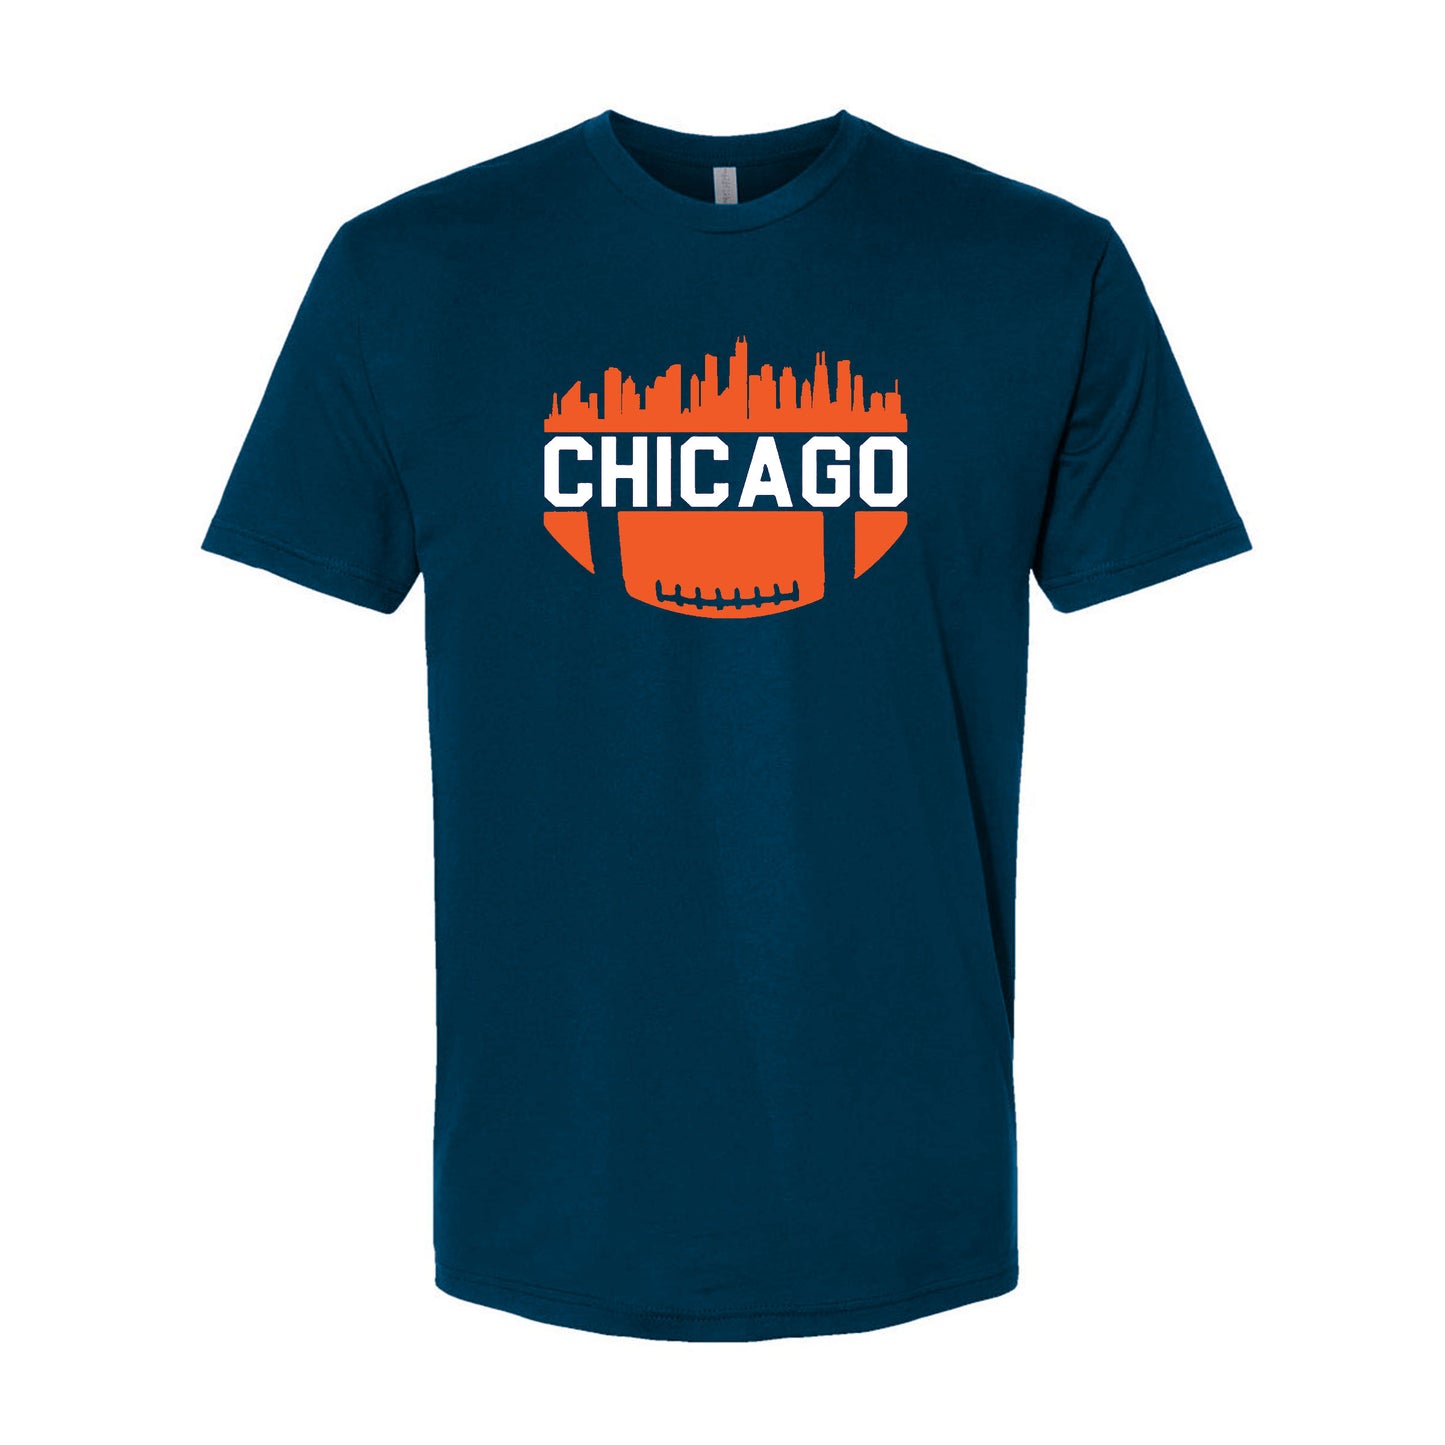 Chicago Football City Skyline Shirt for Football Fans Athletic Sports Fan Collection